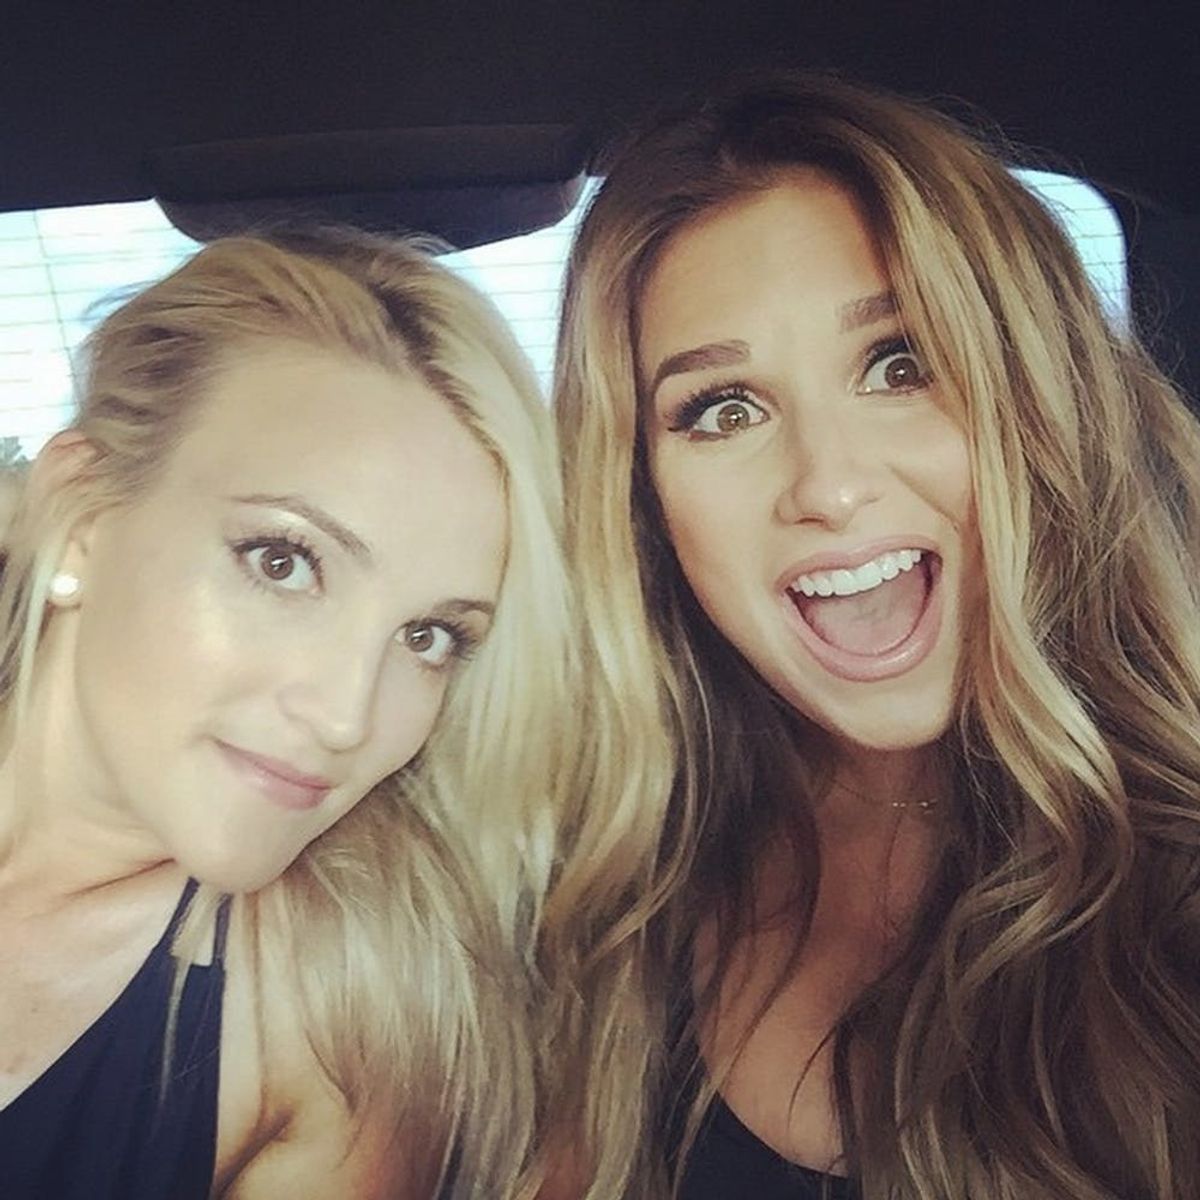 16 Must-See Instagrams from the 2015 CMT Music Awards